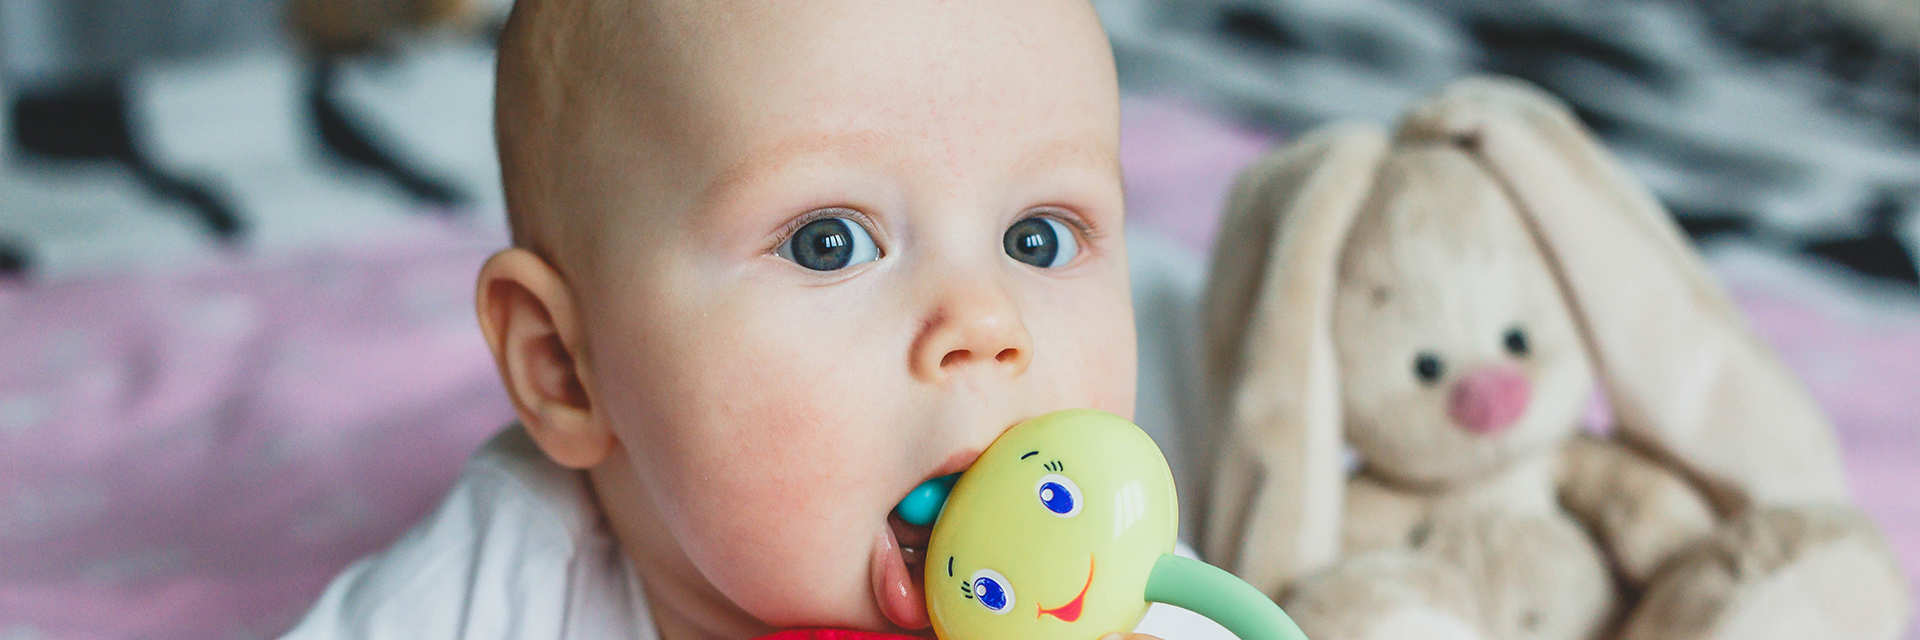 Baby with toy in mouth